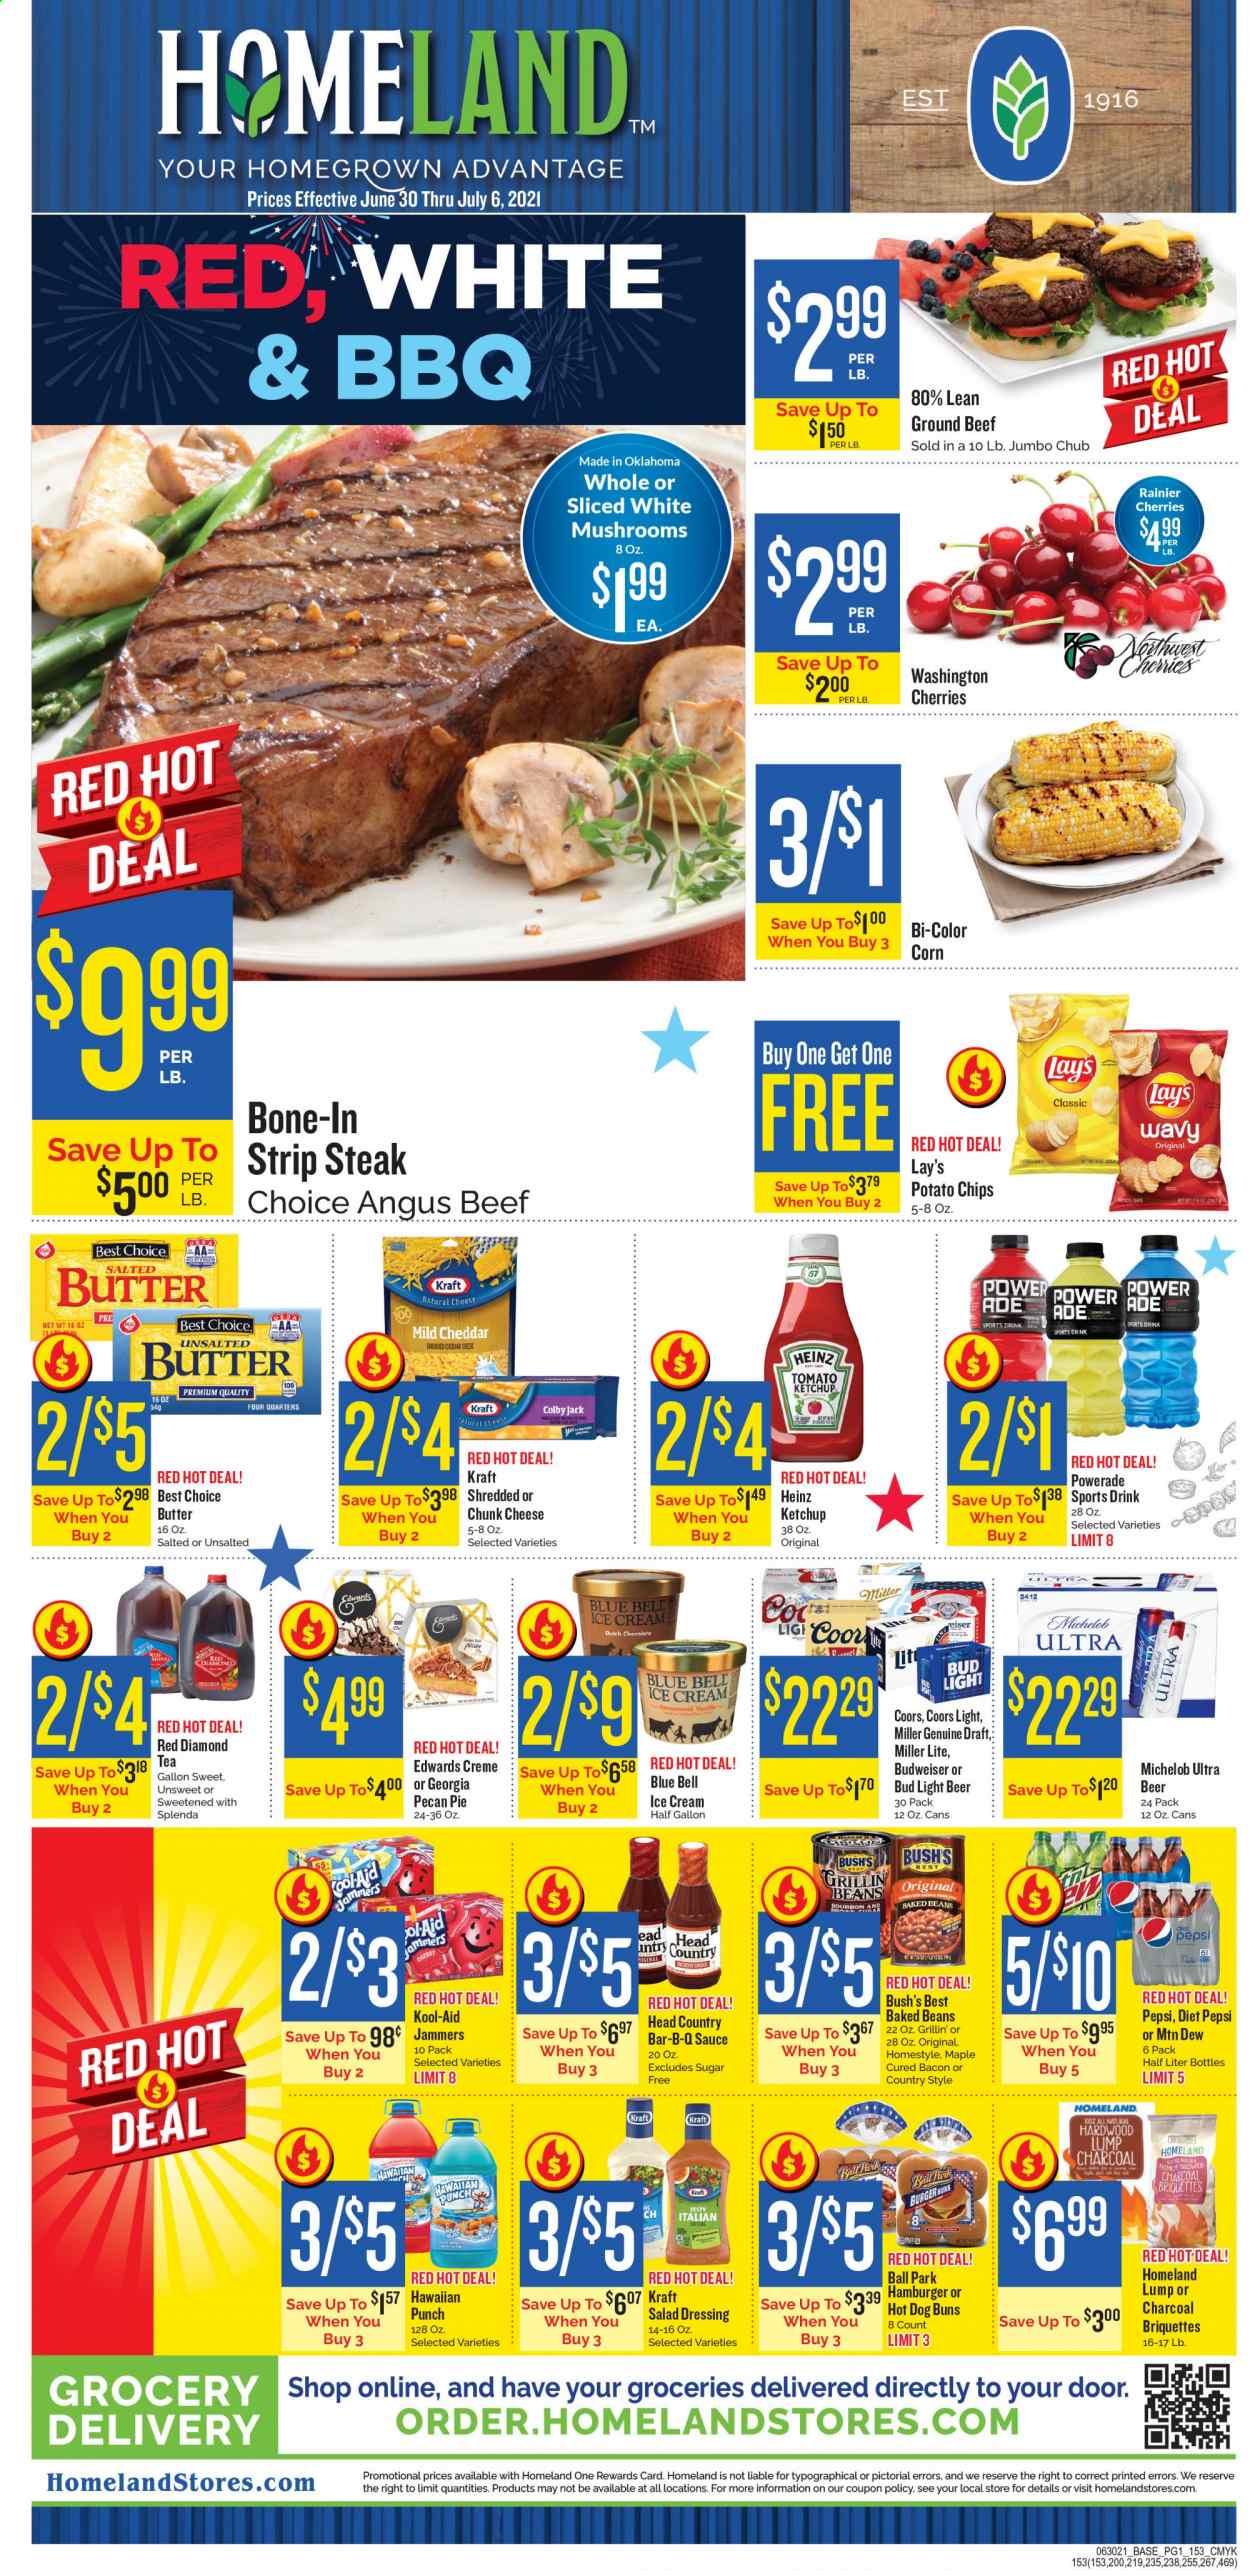 thumbnail - Homeland Flyer - 06/30/2021 - 07/06/2021 - Sales products - Budweiser, Miller Lite, Coors, Michelob, pie, buns, burger buns, beans, corn, cherries, sauce, Kraft®, bacon, Colby cheese, mild cheddar, chunk cheese, ice cream, Blue Bell, potato chips, chips, Lay’s, sugar, Heinz, baked beans, salad dressing, ketchup, dressing, Mountain Dew, Powerade, Pepsi, Diet Pepsi, fruit punch, tea, bourbon, beer, Bud Light, beef meat, ground beef, steak, striploin steak. Page 1.